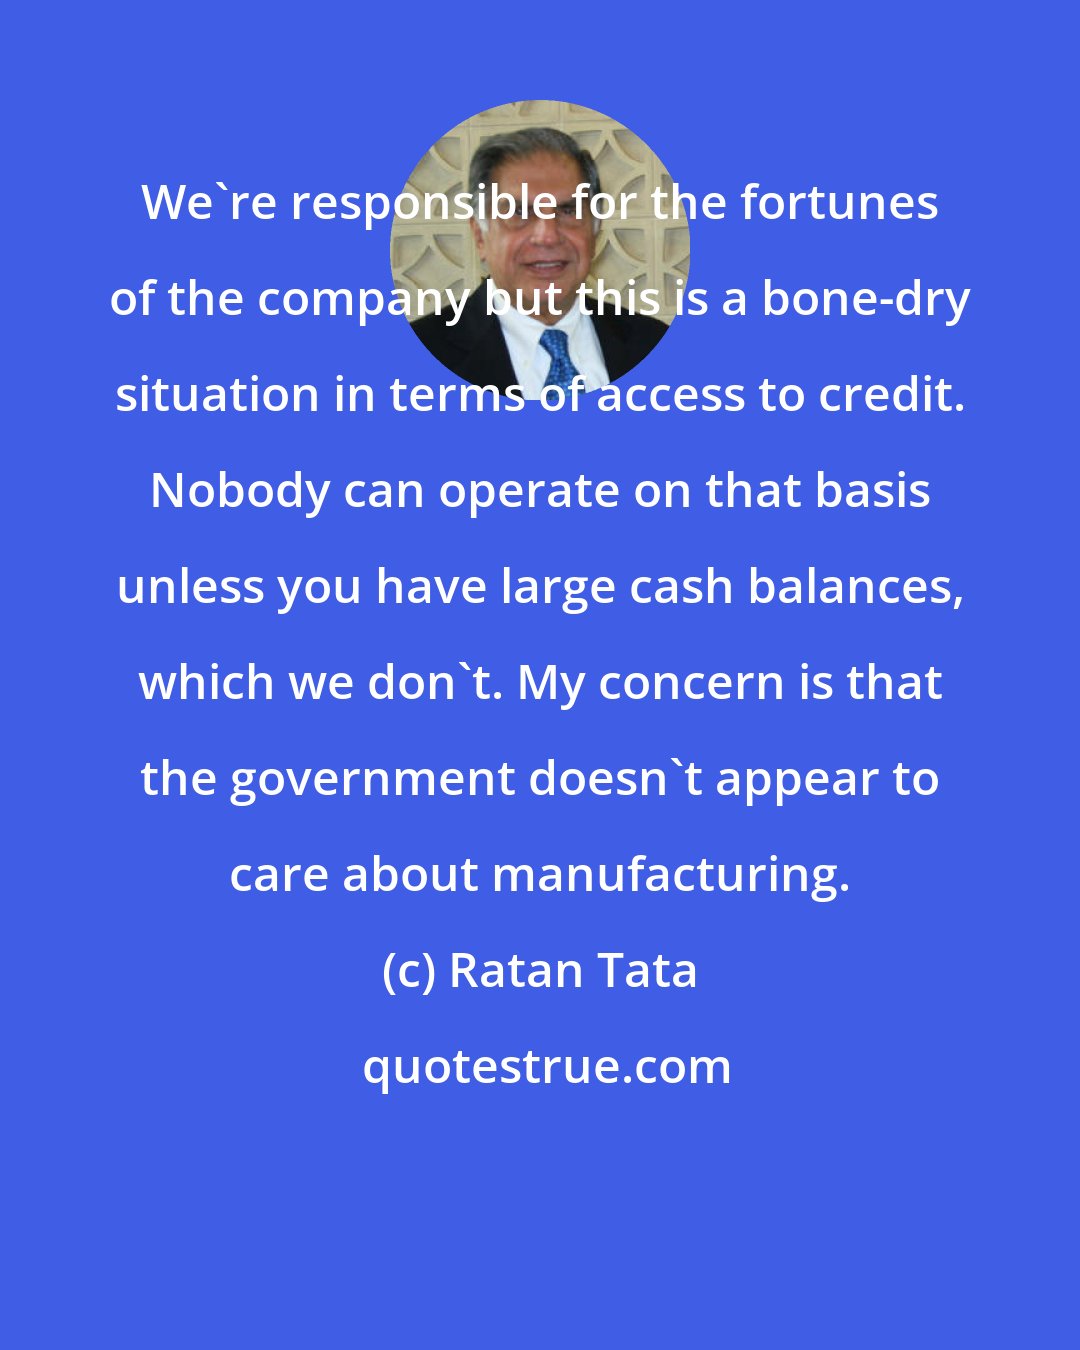 Ratan Tata: We're responsible for the fortunes of the company but this is a bone-dry situation in terms of access to credit. Nobody can operate on that basis unless you have large cash balances, which we don't. My concern is that the government doesn't appear to care about manufacturing.